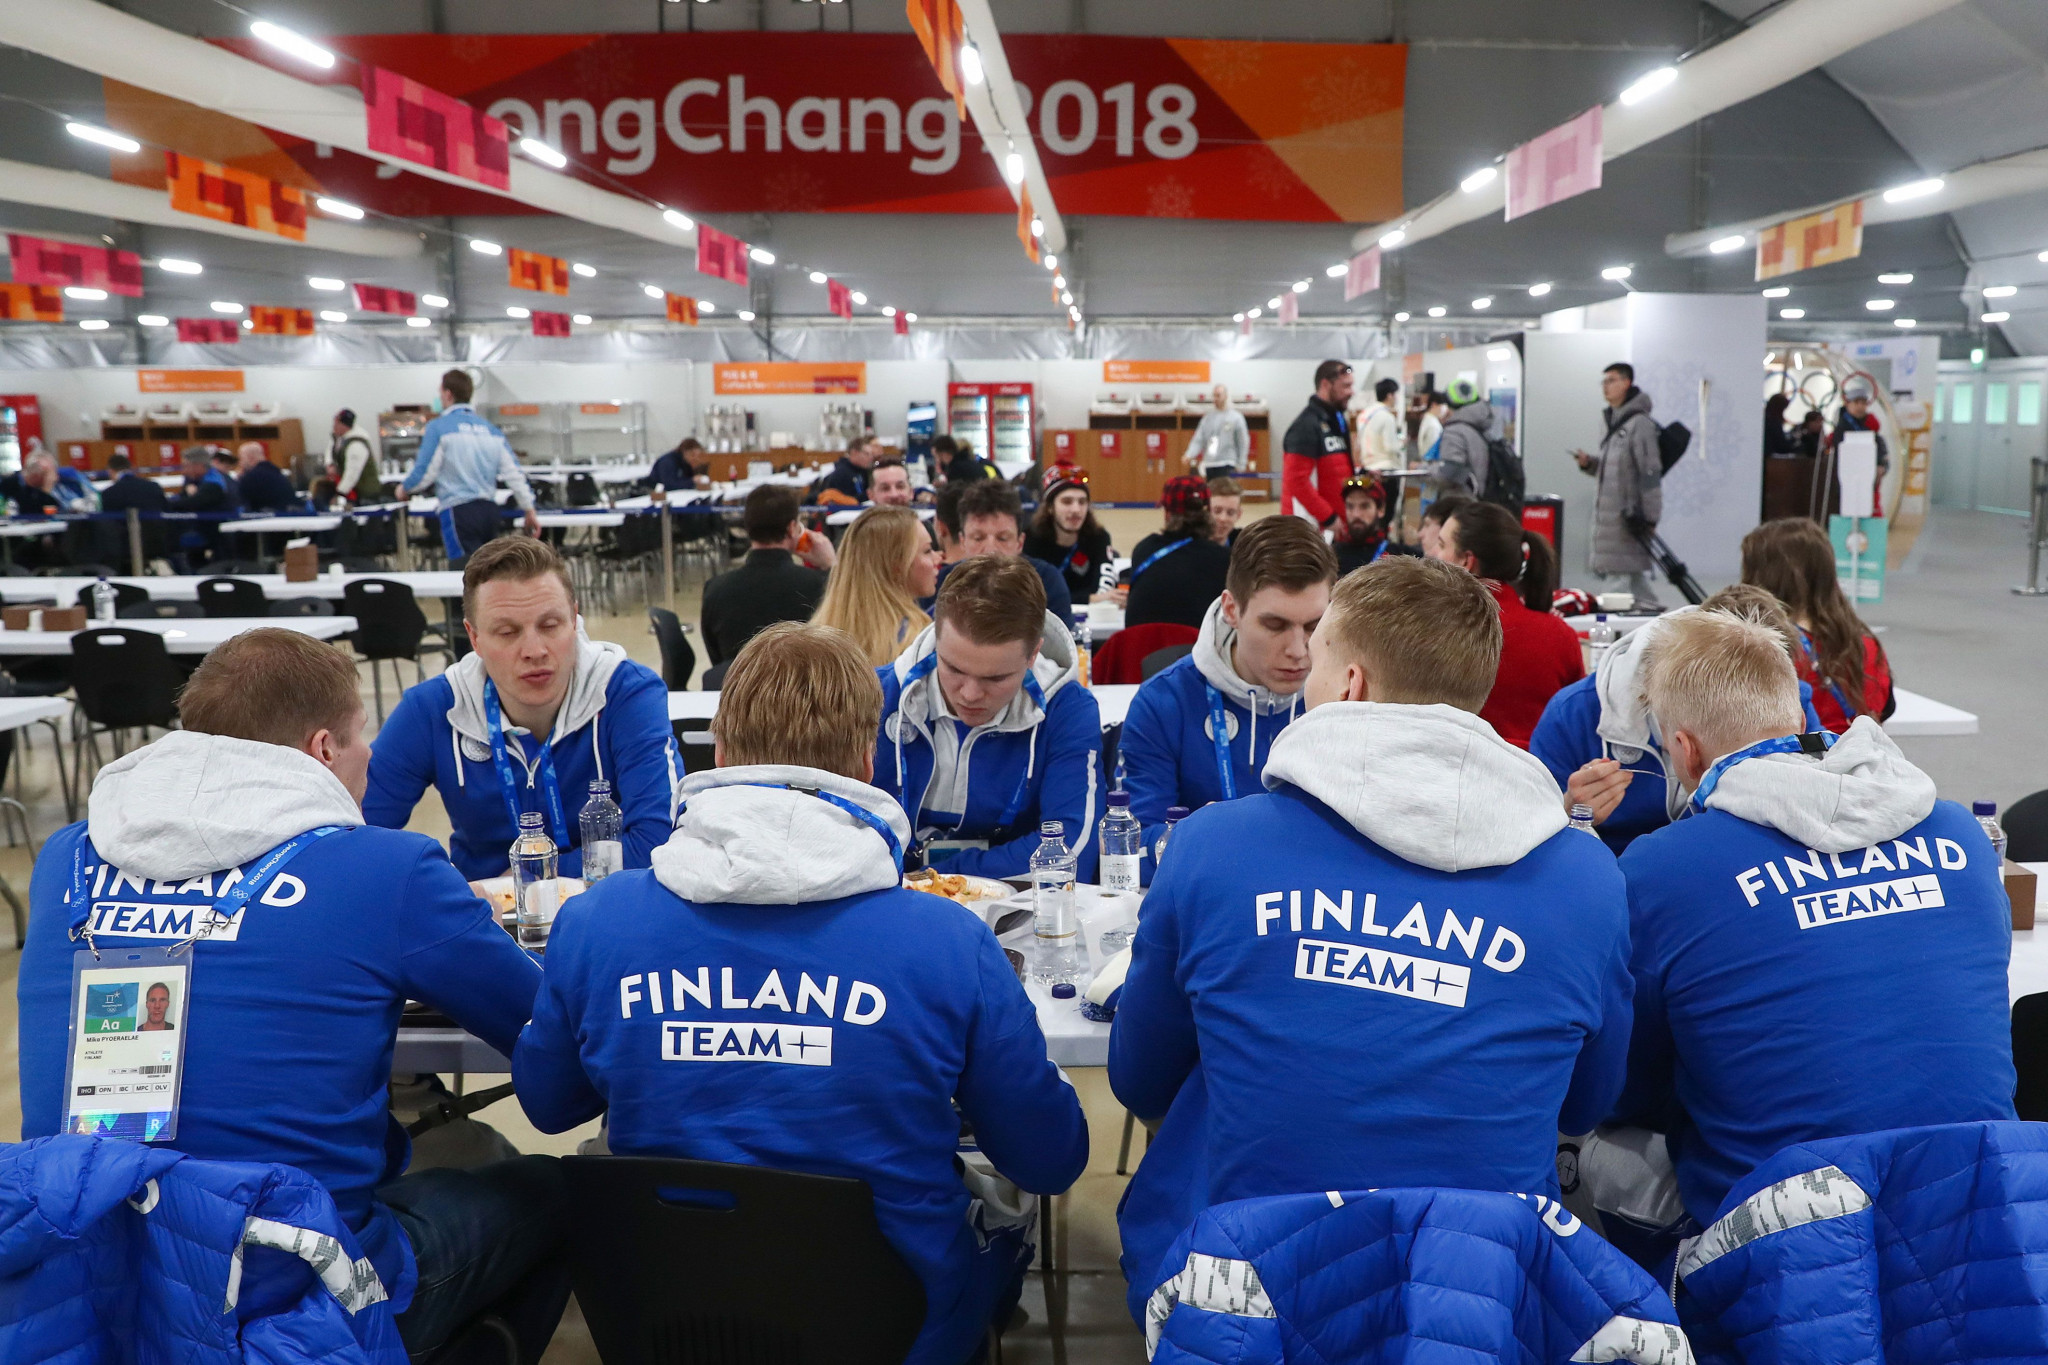 Pyeongchang 2018 served 18,000 meals a day in the Olympic Village ©Getty Images